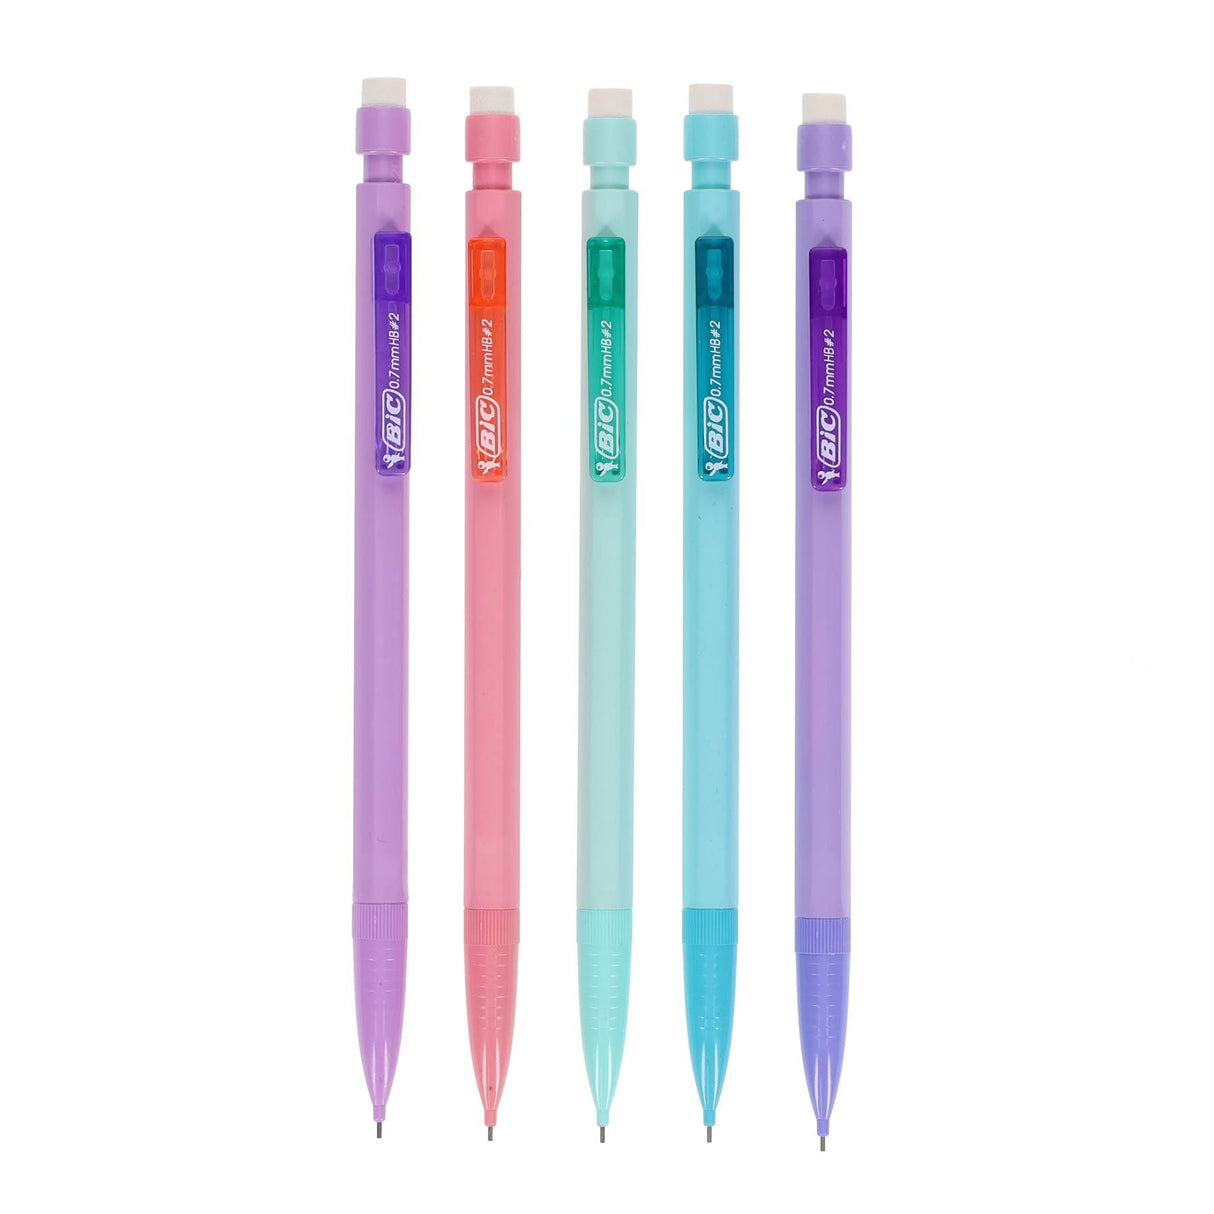 BIC Matic Mechanical Pencil - Pastel - Pack of 5-Pencils- Buy Online at Stationery Shop UK